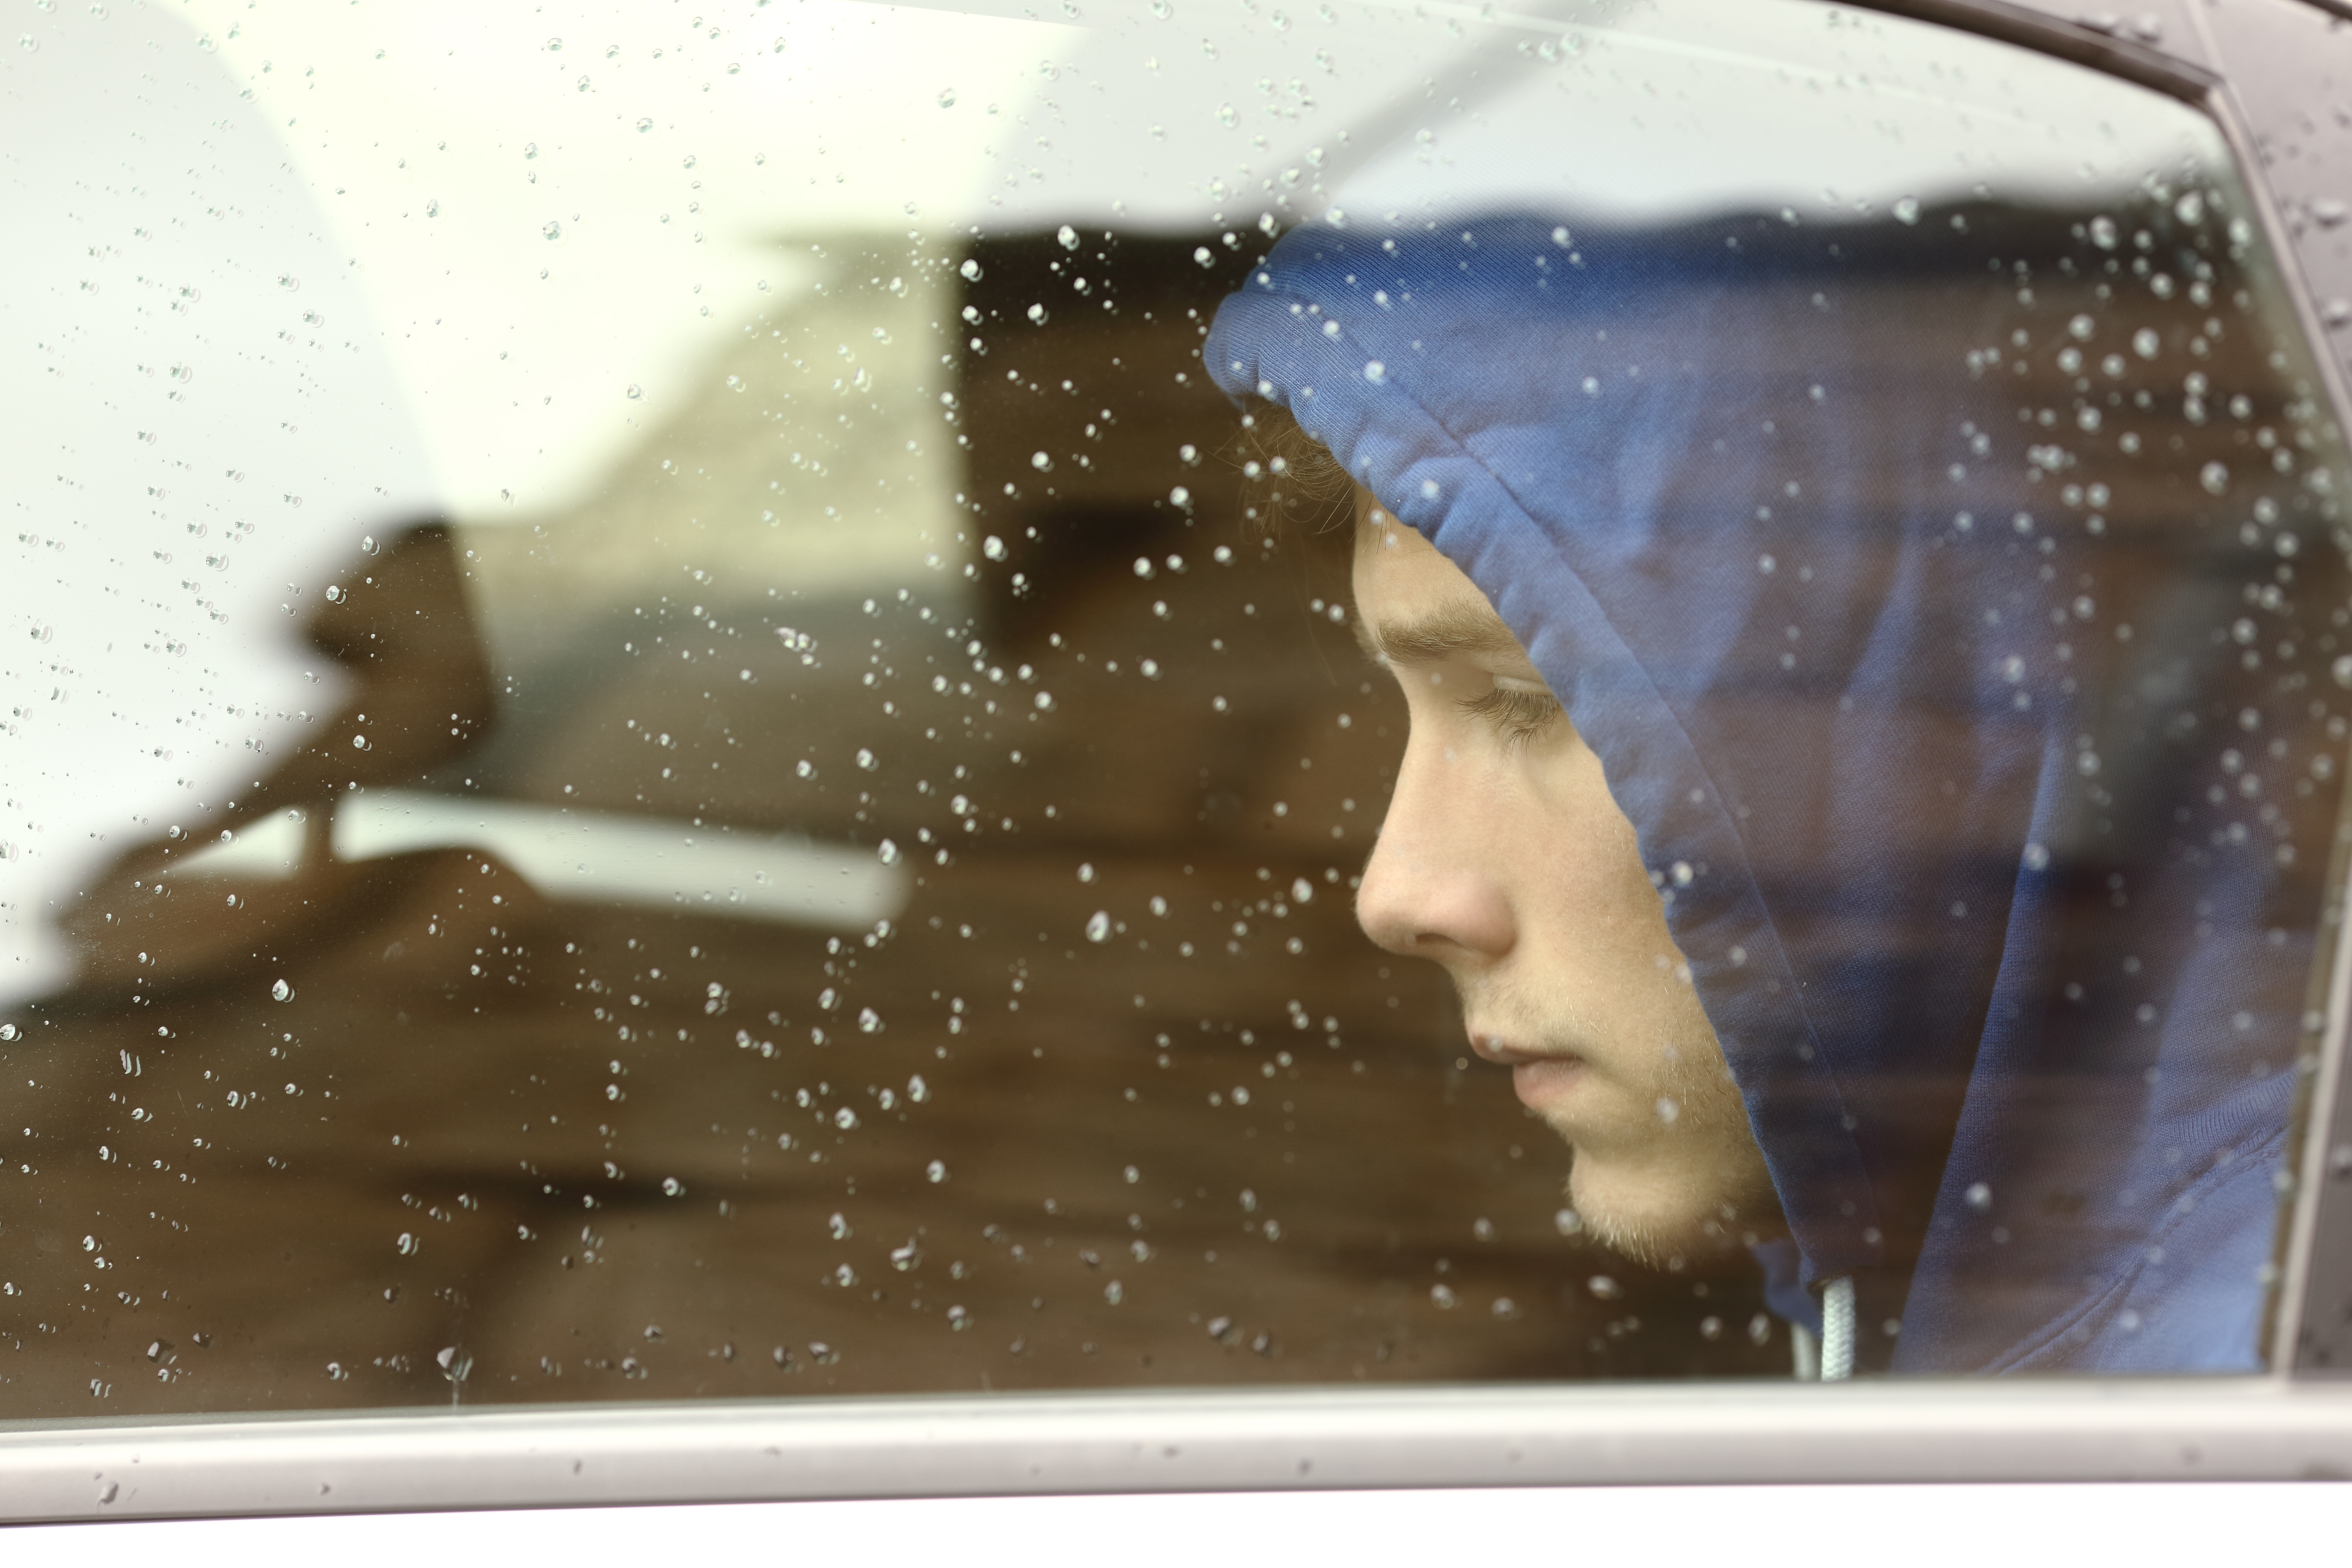 A sad young guy sitting in a car | Source: Shutterstock